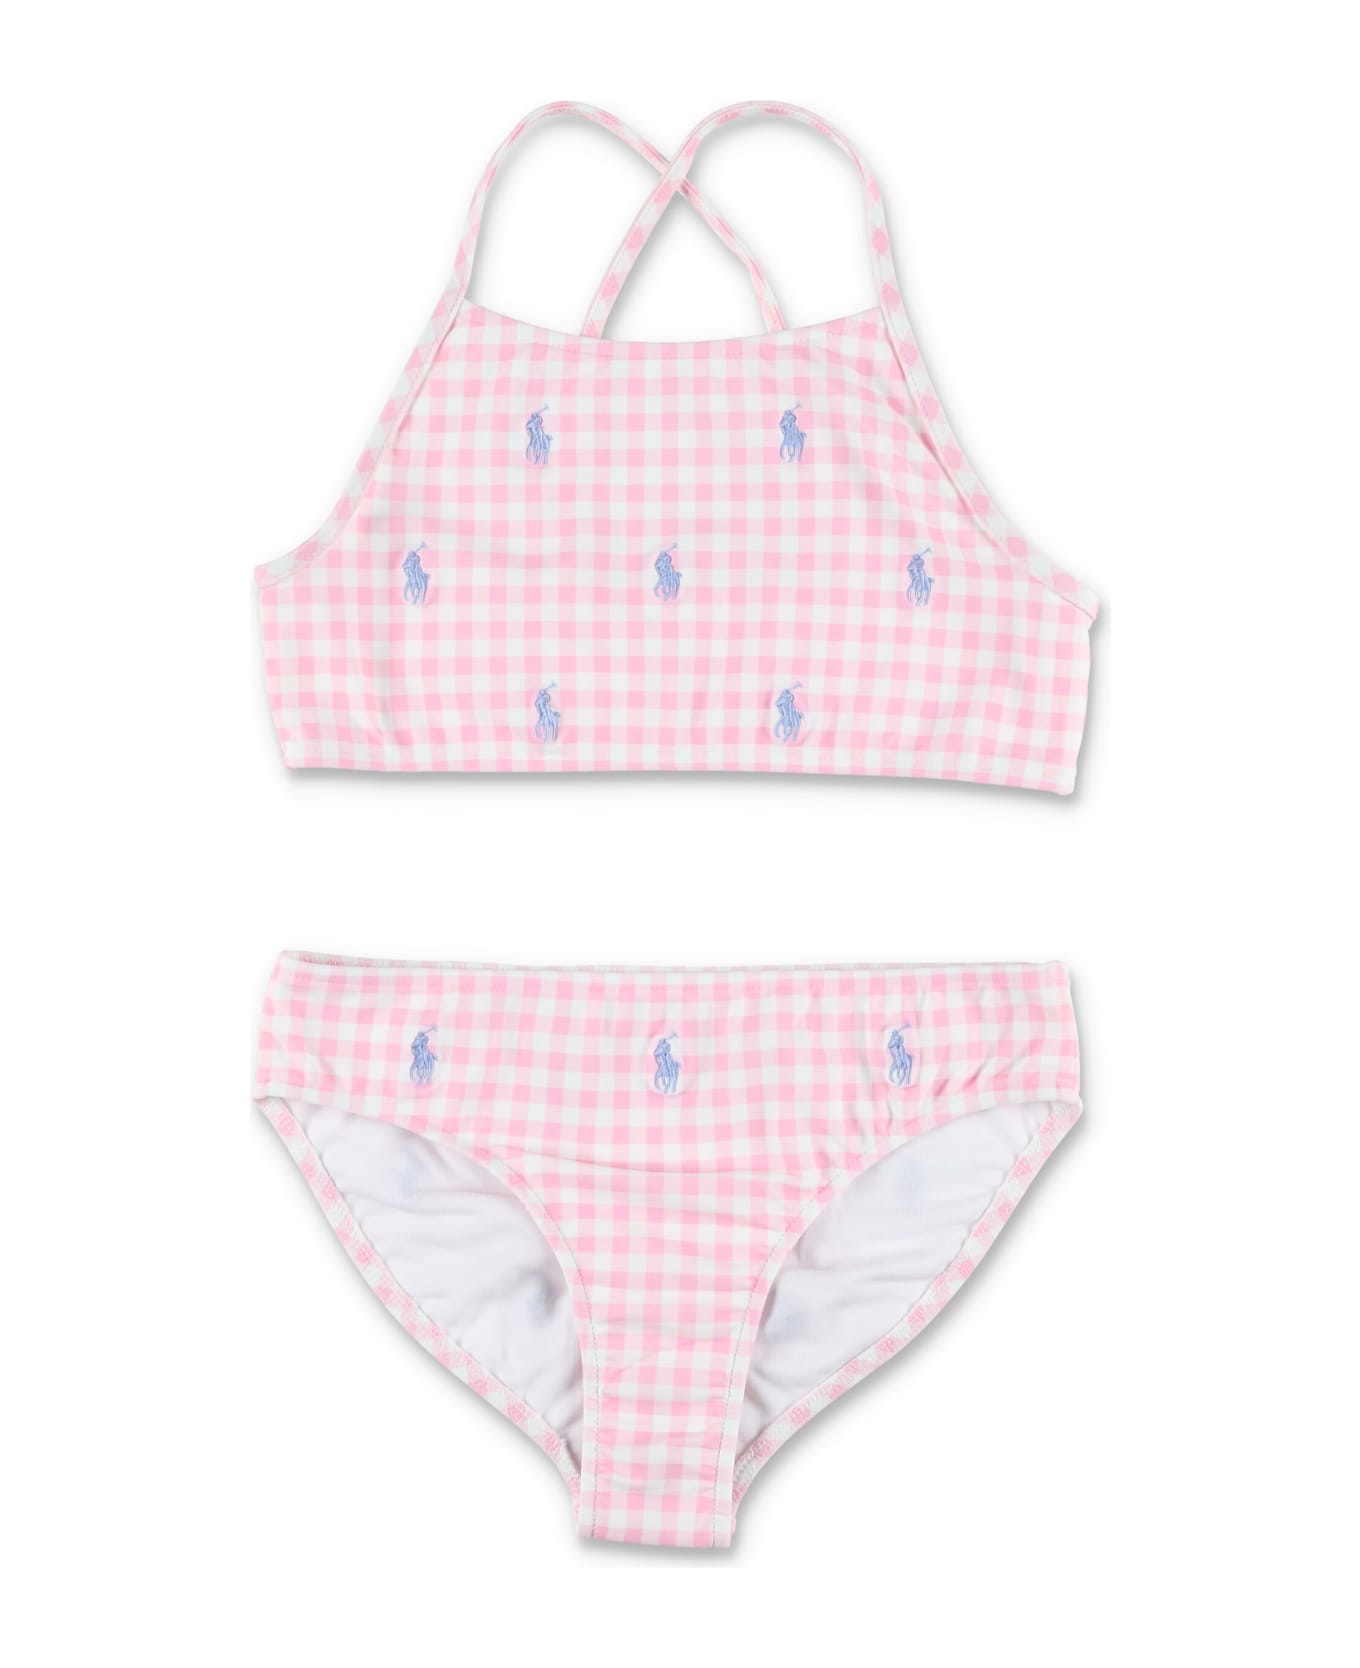 Polo Ralph Lauren Gingham Polo Pony Two-piece Swimsuit - PINK